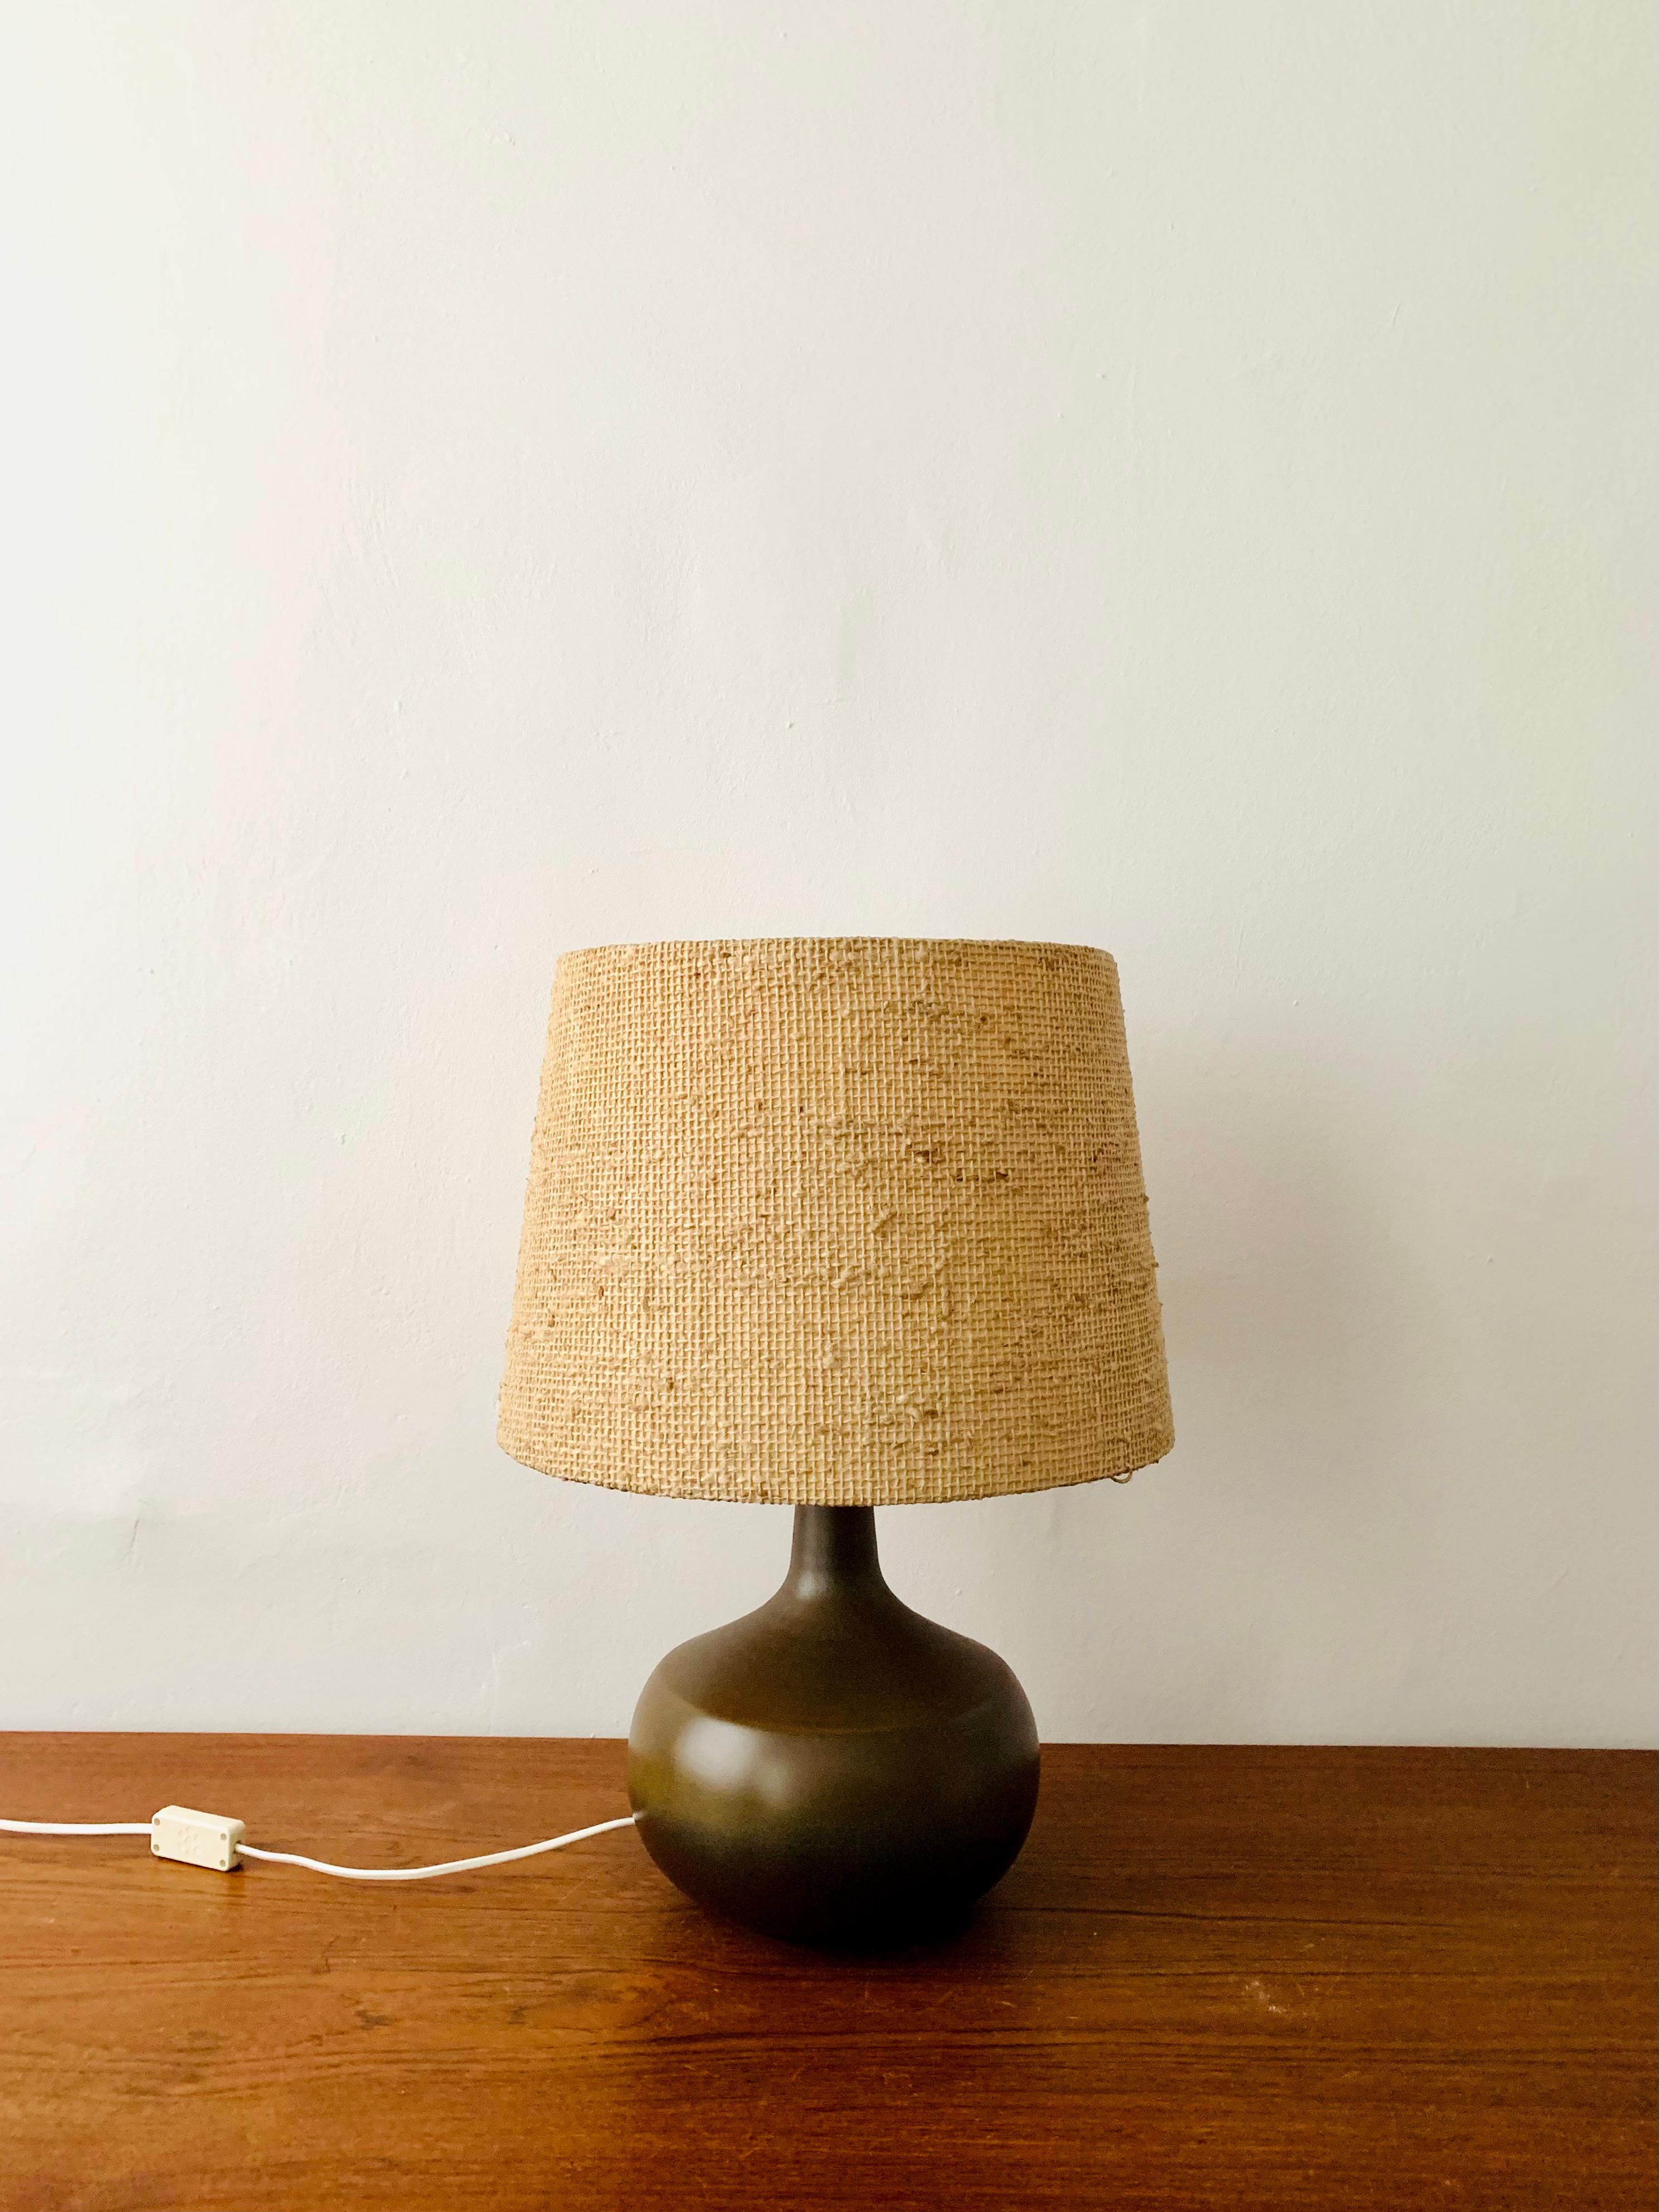 Wonderful ceramic table lamp from the 1960s.
Extremely high-quality workmanship and very beautiful design.
A very cozy light is created.

Manufacturer: Rosenthal Studio Line

Condition:

Very good vintage condition with minimal signs of